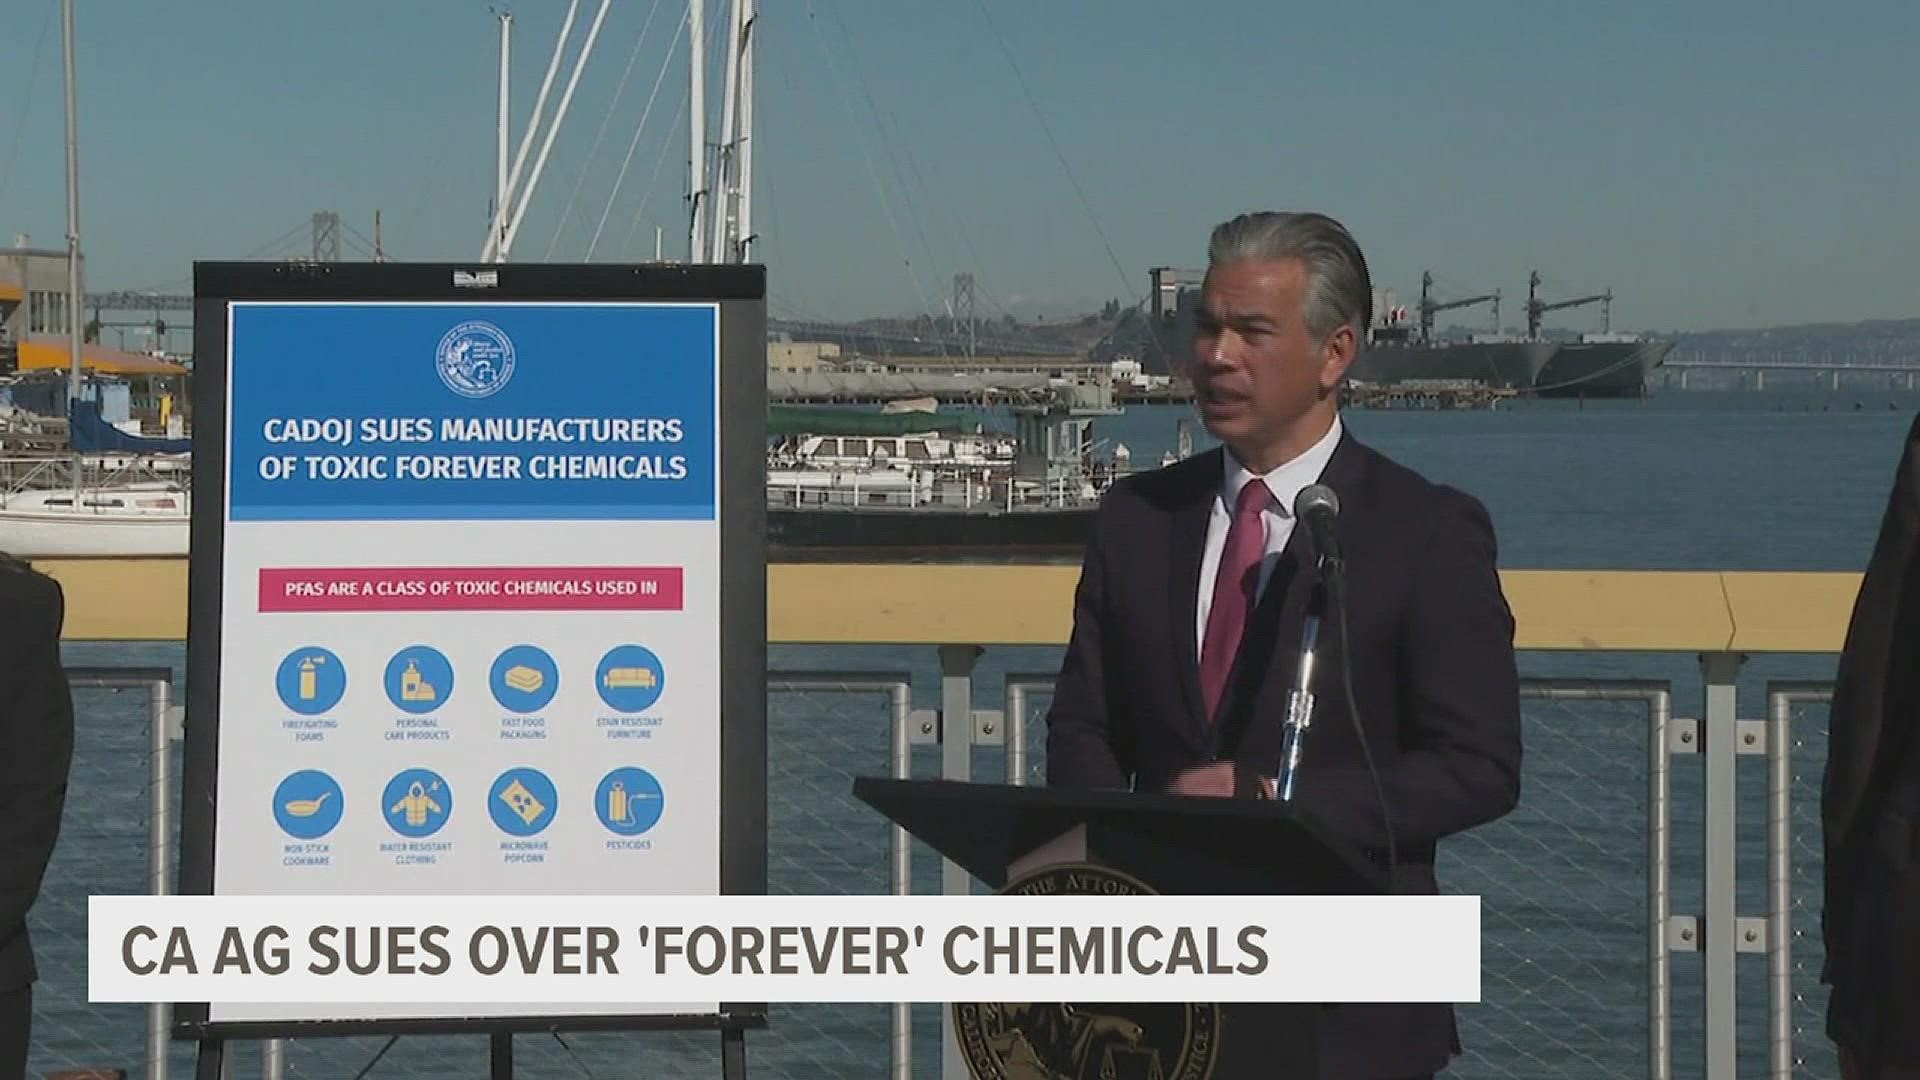 Attorney General Rob Bonta announced the lawsuit Thursday against the manufacturers of compounds that have been used in consumer goods and industry since the 1940s.